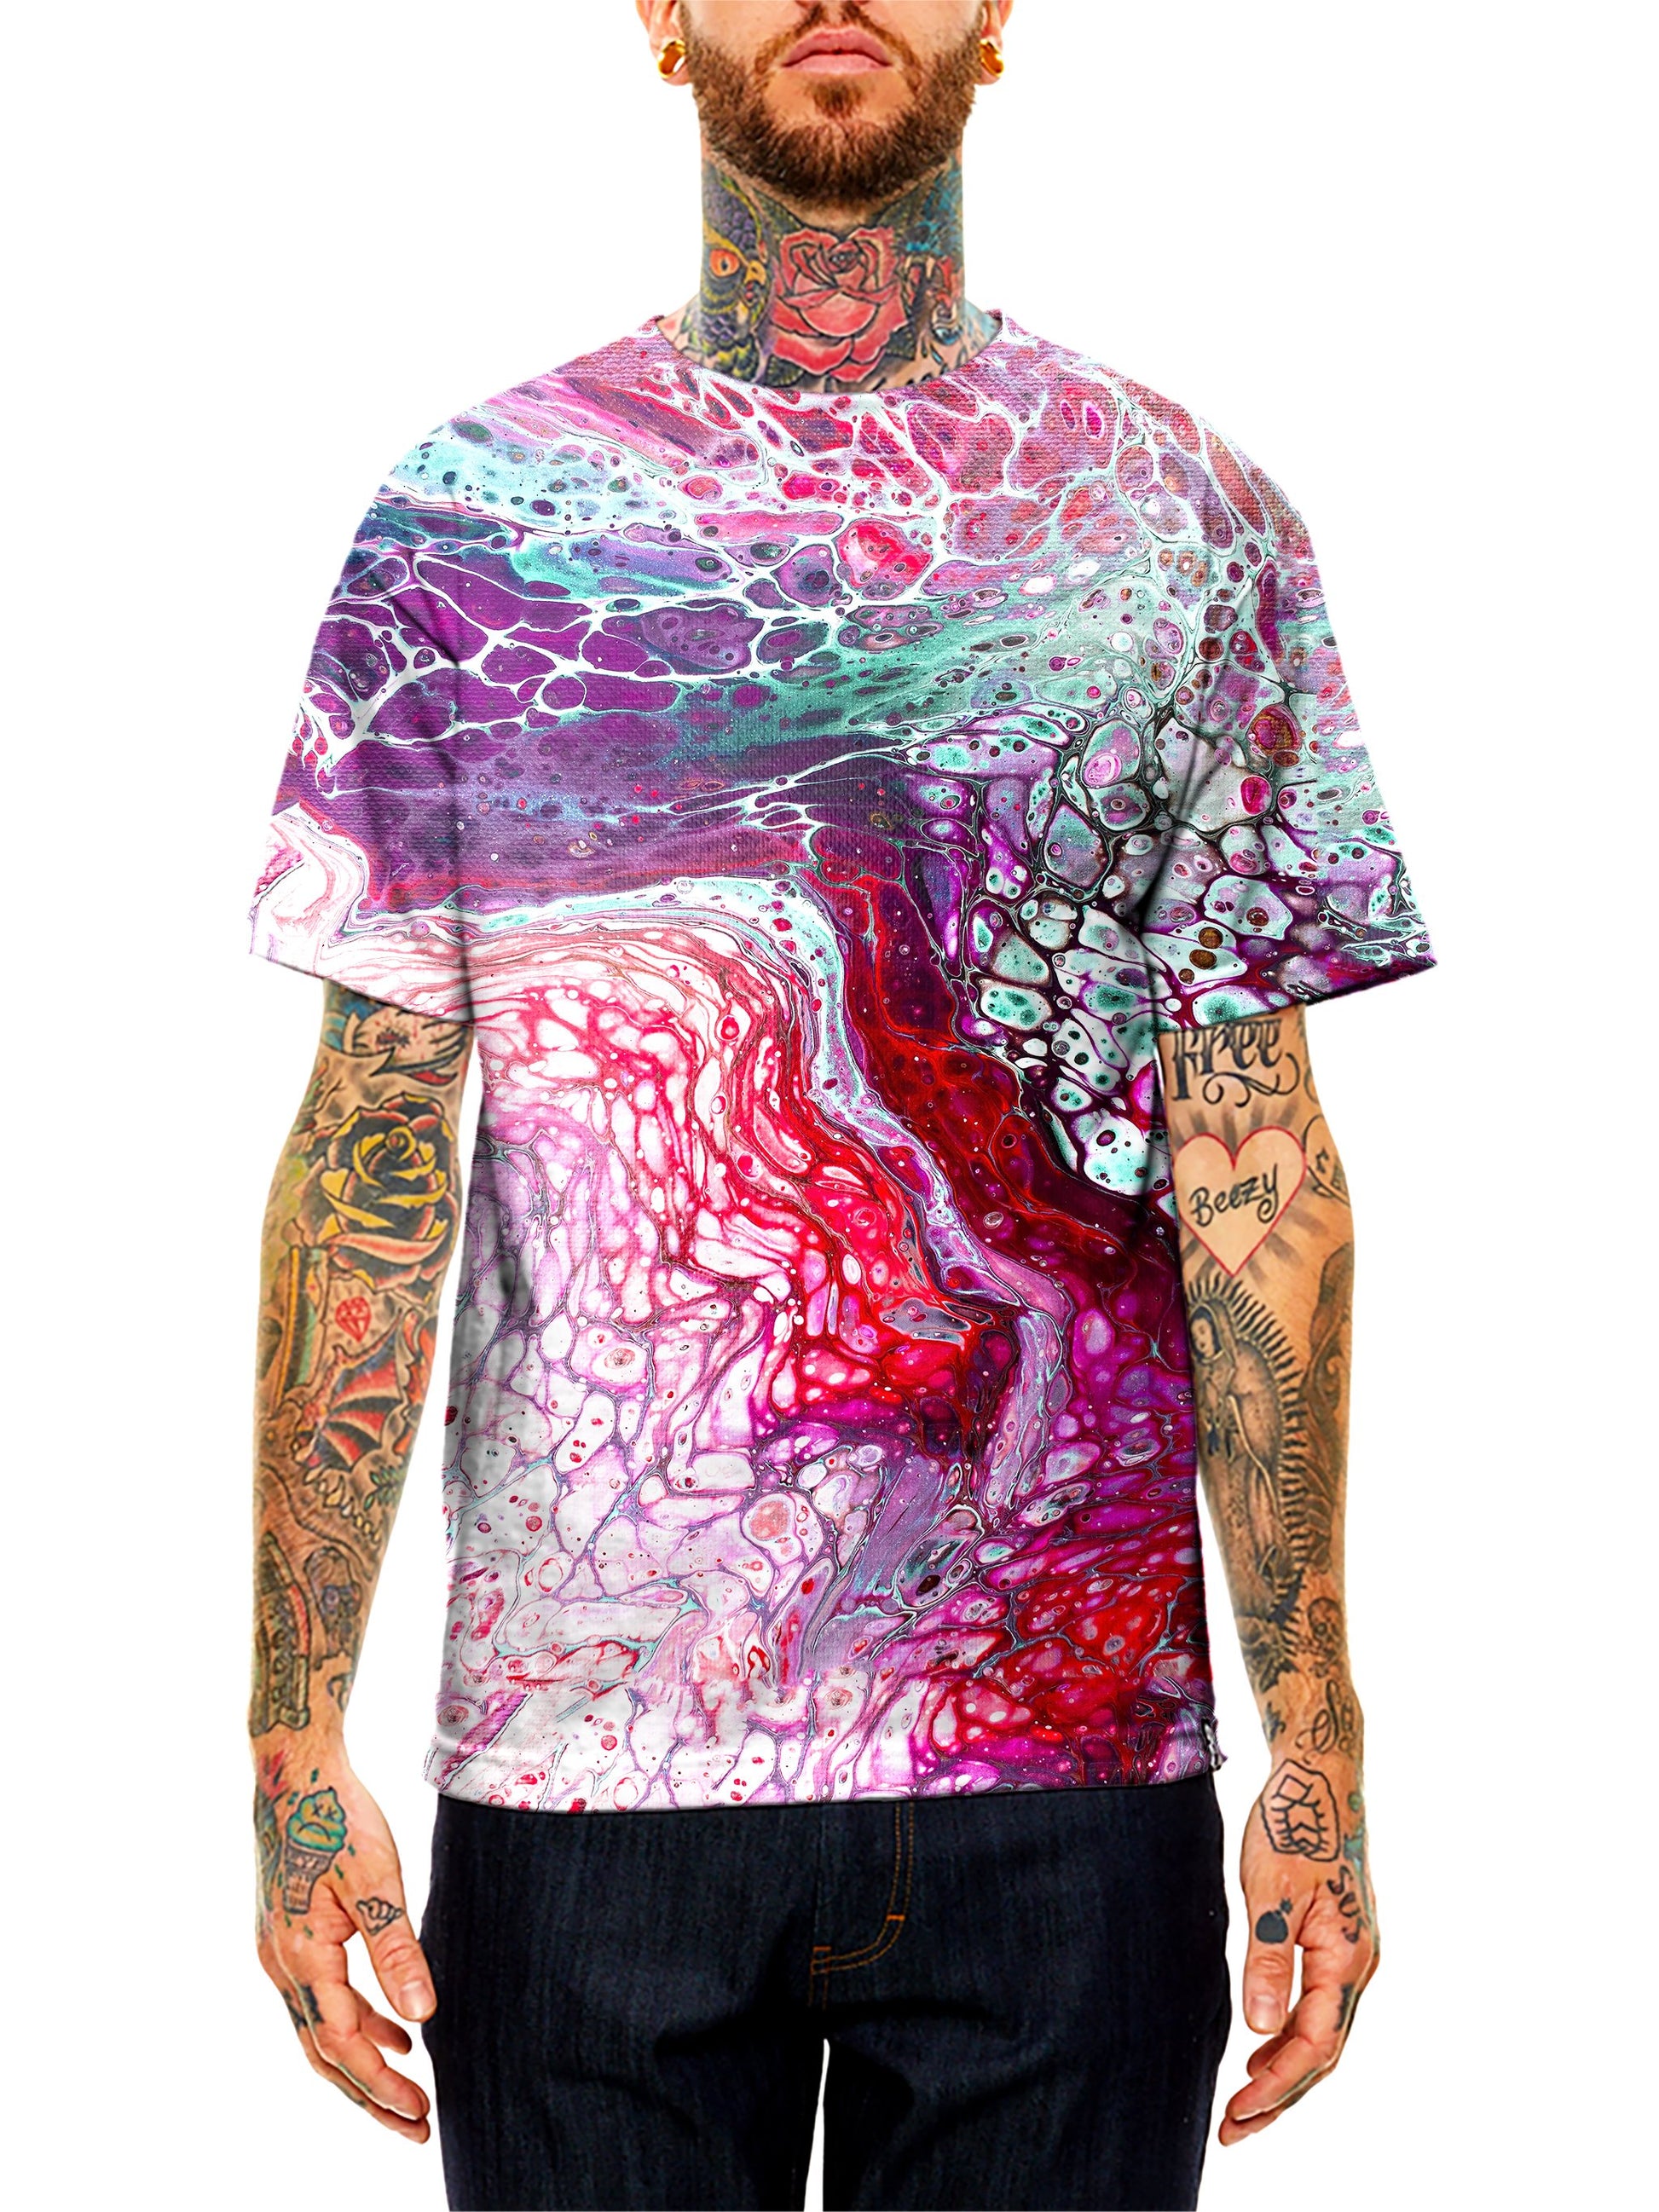 Model wearing GratefullyDyed Apparel pink, purple & blue marbled paint a unisex t-shirt.